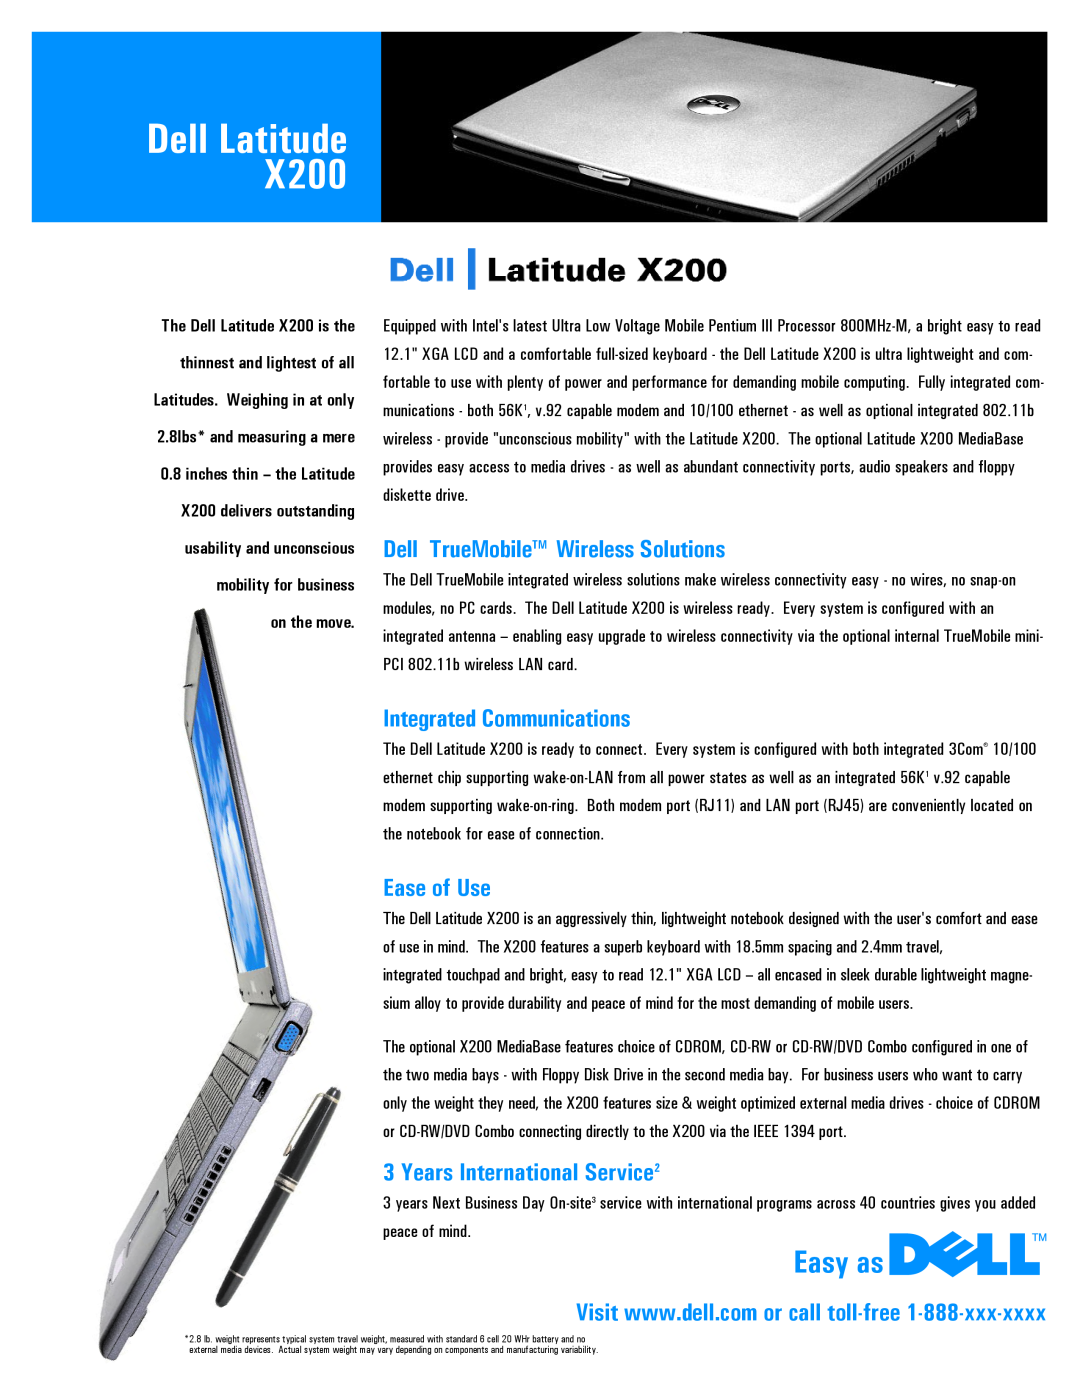 Dell X200 manual Dell Latitude, Easy as, Dell TrueMobileTM Wireless Solutions, Integrated Communications, Ease of Use 